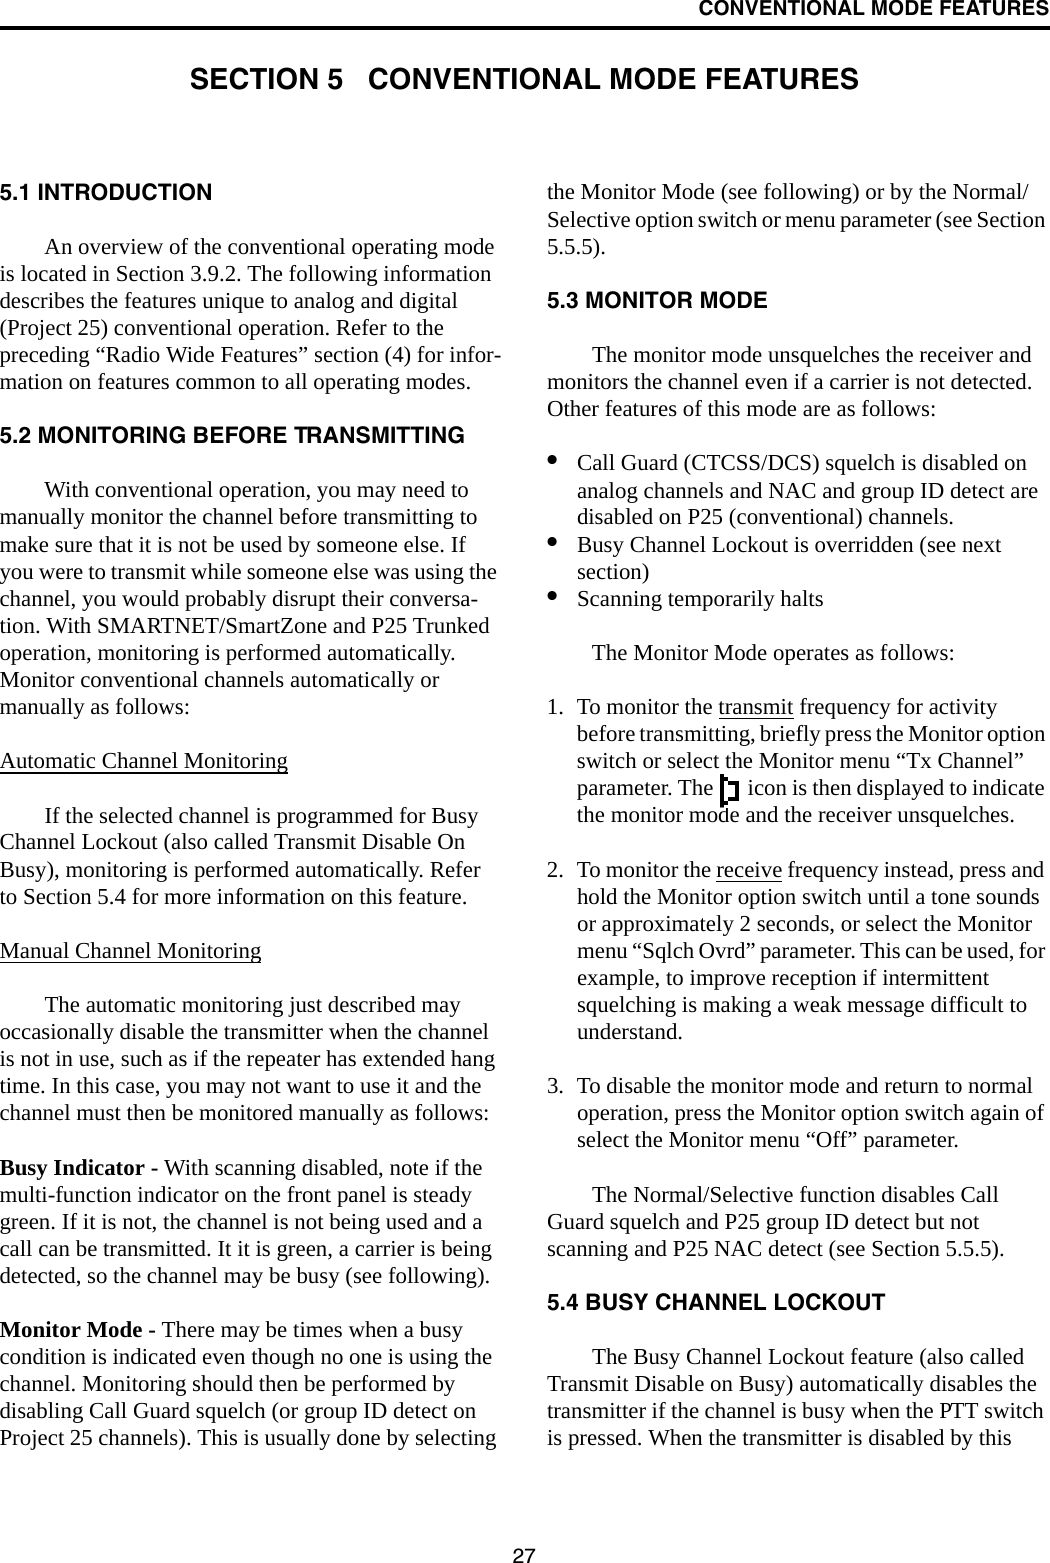 27CONVENTIONAL MODE FEATURESSECTION 5   CONVENTIONAL MODE FEATURES5.1 INTRODUCTIONAn overview of the conventional operating mode is located in Section 3.9.2. The following information describes the features unique to analog and digital (Project 25) conventional operation. Refer to the preceding “Radio Wide Features” section (4) for infor-mation on features common to all operating modes.5.2 MONITORING BEFORE TRANSMITTINGWith conventional operation, you may need to manually monitor the channel before transmitting to make sure that it is not be used by someone else. If you were to transmit while someone else was using the channel, you would probably disrupt their conversa-tion. With SMARTNET/SmartZone and P25 Trunked operation, monitoring is performed automatically. Monitor conventional channels automatically or manually as follows:Automatic Channel MonitoringIf the selected channel is programmed for Busy Channel Lockout (also called Transmit Disable On Busy), monitoring is performed automatically. Refer to Section 5.4 for more information on this feature.Manual Channel MonitoringThe automatic monitoring just described may occasionally disable the transmitter when the channel is not in use, such as if the repeater has extended hang time. In this case, you may not want to use it and the channel must then be monitored manually as follows:Busy Indicator - With scanning disabled, note if the multi-function indicator on the front panel is steady green. If it is not, the channel is not being used and a call can be transmitted. It it is green, a carrier is being detected, so the channel may be busy (see following). Monitor Mode - There may be times when a busy condition is indicated even though no one is using the channel. Monitoring should then be performed by disabling Call Guard squelch (or group ID detect on Project 25 channels). This is usually done by selecting the Monitor Mode (see following) or by the Normal/Selective option switch or menu parameter (see Section 5.5.5). 5.3 MONITOR MODEThe monitor mode unsquelches the receiver and monitors the channel even if a carrier is not detected. Other features of this mode are as follows:•Call Guard (CTCSS/DCS) squelch is disabled on analog channels and NAC and group ID detect are disabled on P25 (conventional) channels. •Busy Channel Lockout is overridden (see next section)•Scanning temporarily halts The Monitor Mode operates as follows:1. To monitor the transmit frequency for activity before transmitting, briefly press the Monitor option switch or select the Monitor menu “Tx Channel” parameter. The   icon is then displayed to indicate the monitor mode and the receiver unsquelches. 2. To monitor the receive frequency instead, press and hold the Monitor option switch until a tone sounds or approximately 2 seconds, or select the Monitor menu “Sqlch Ovrd” parameter. This can be used, for example, to improve reception if intermittent squelching is making a weak message difficult to understand.3. To disable the monitor mode and return to normal operation, press the Monitor option switch again of select the Monitor menu “Off” parameter.The Normal/Selective function disables Call Guard squelch and P25 group ID detect but not scanning and P25 NAC detect (see Section 5.5.5).5.4 BUSY CHANNEL LOCKOUTThe Busy Channel Lockout feature (also called Transmit Disable on Busy) automatically disables the transmitter if the channel is busy when the PTT switch is pressed. When the transmitter is disabled by this 